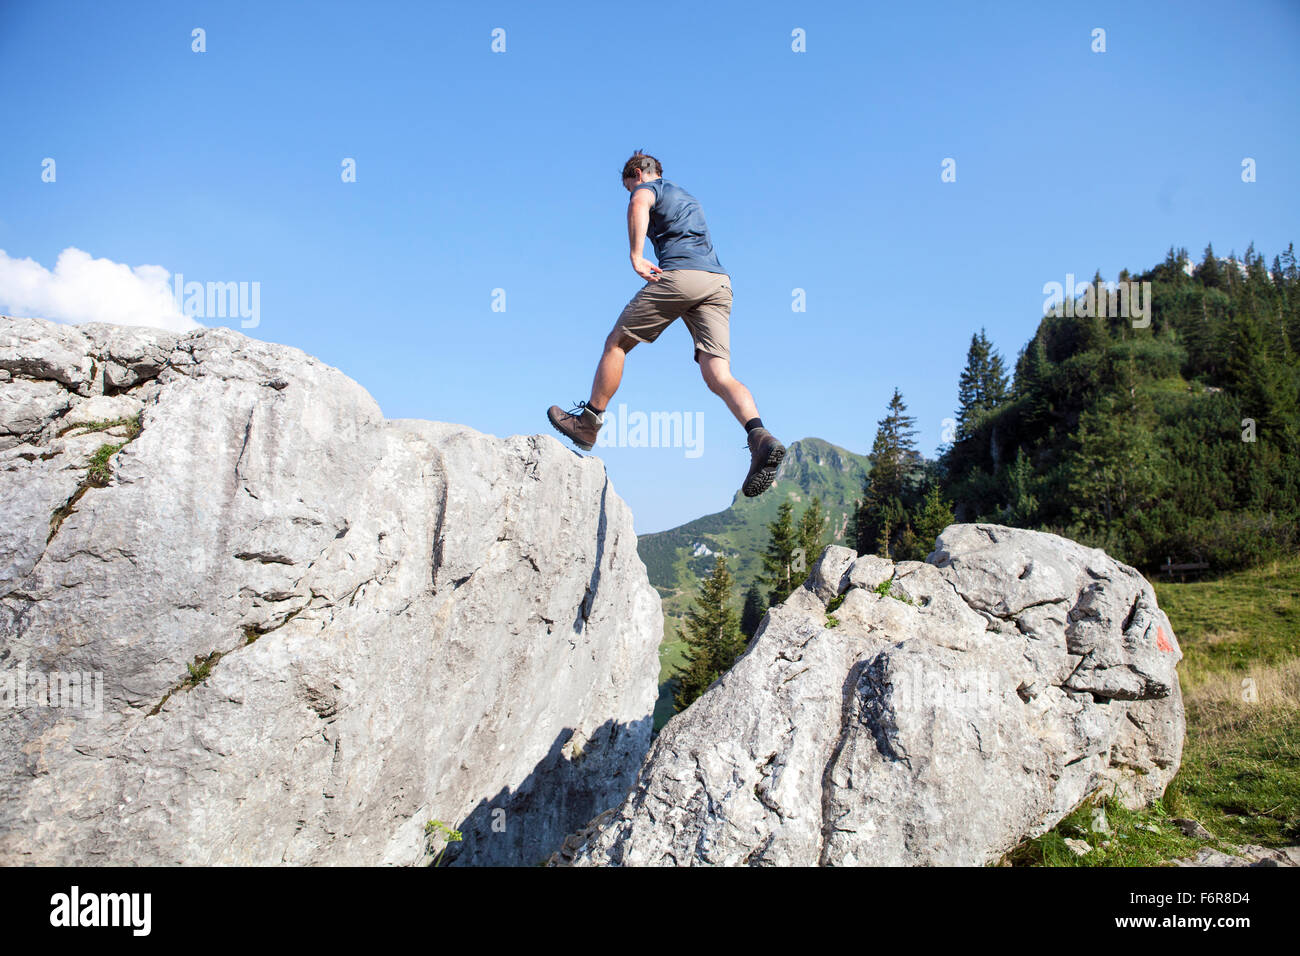 Young man hiking in mountain landscape Stock Photo